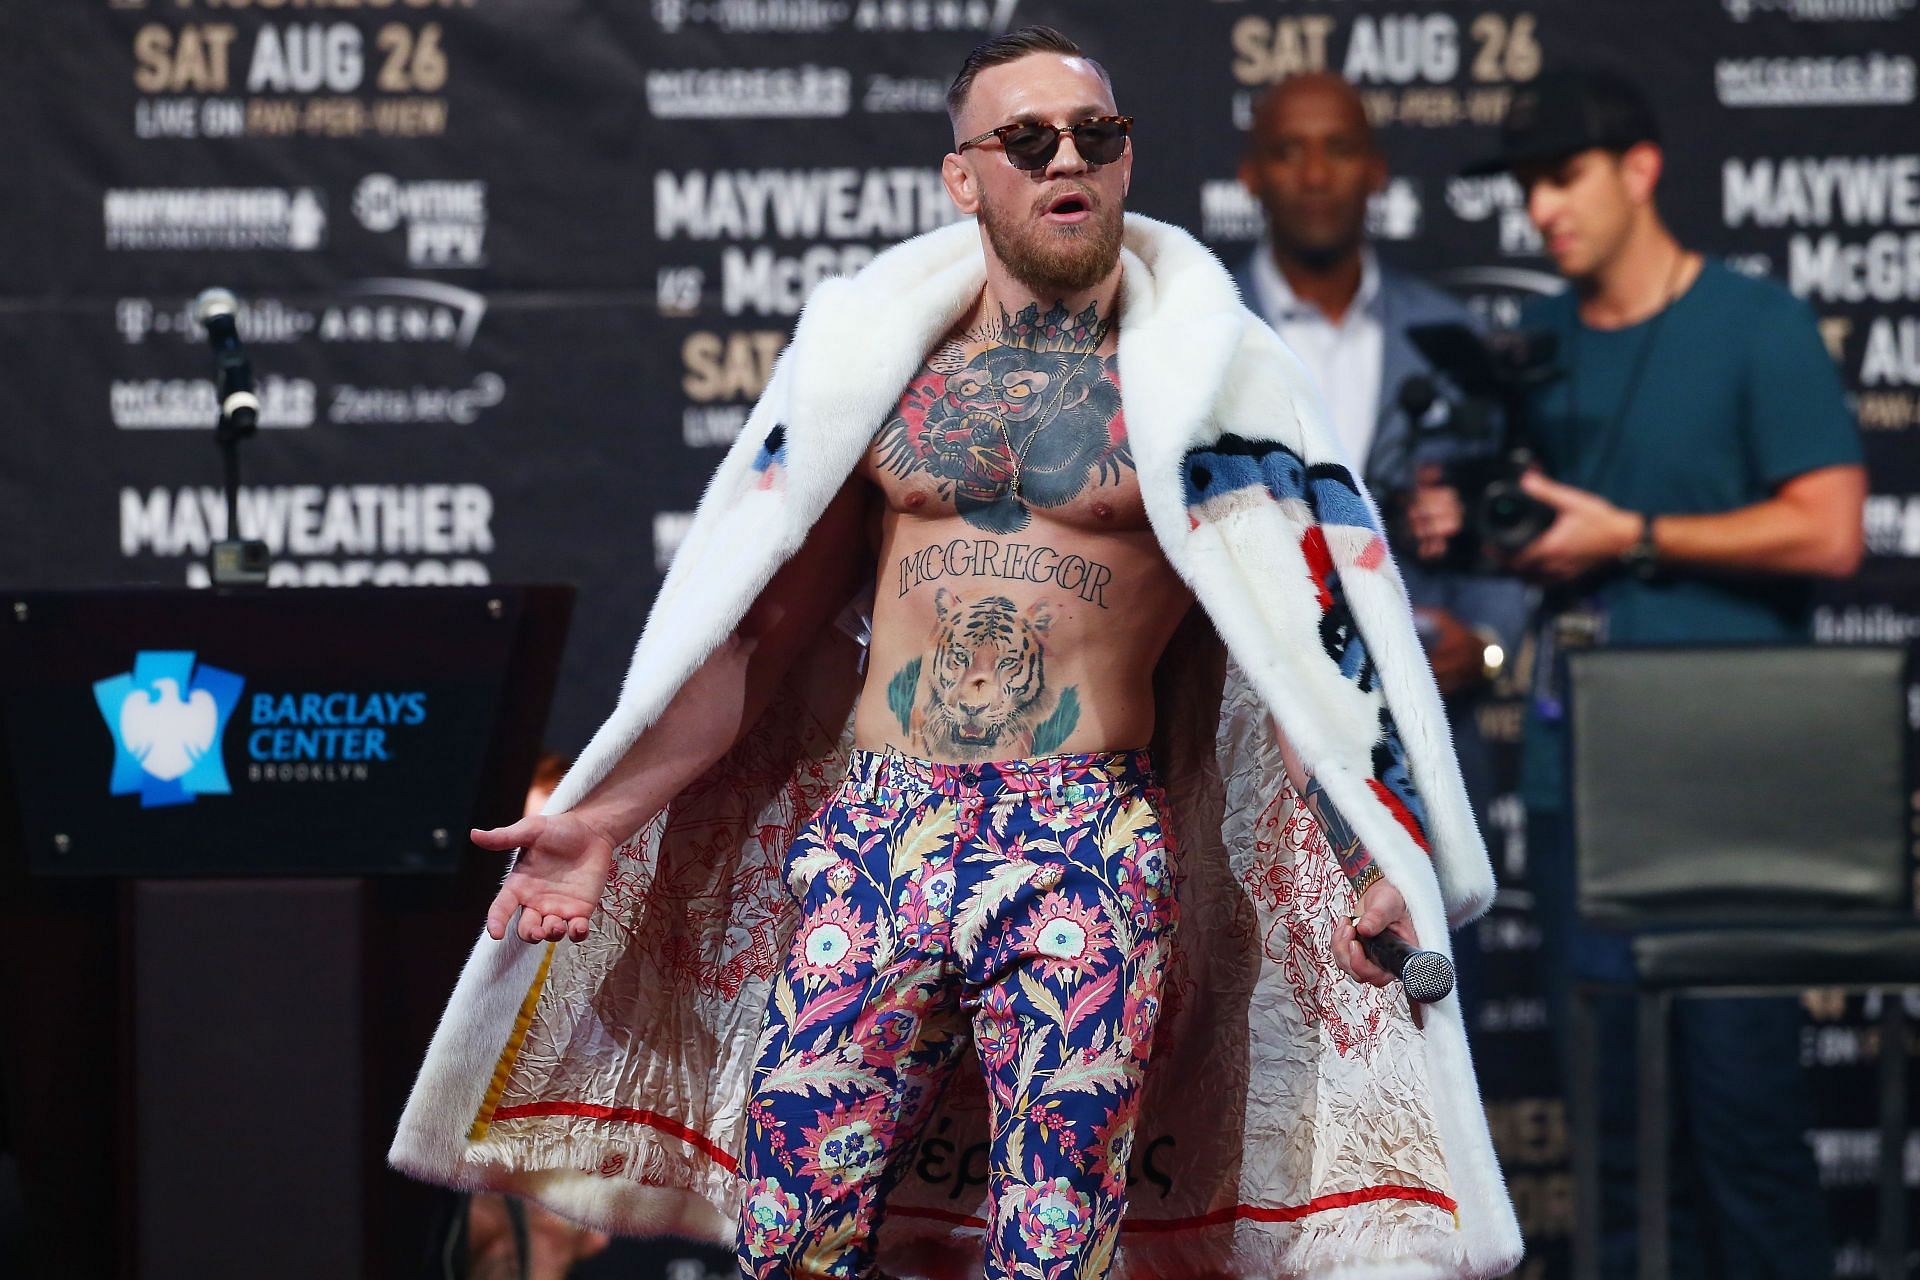 Conor McGregor trolled by fans